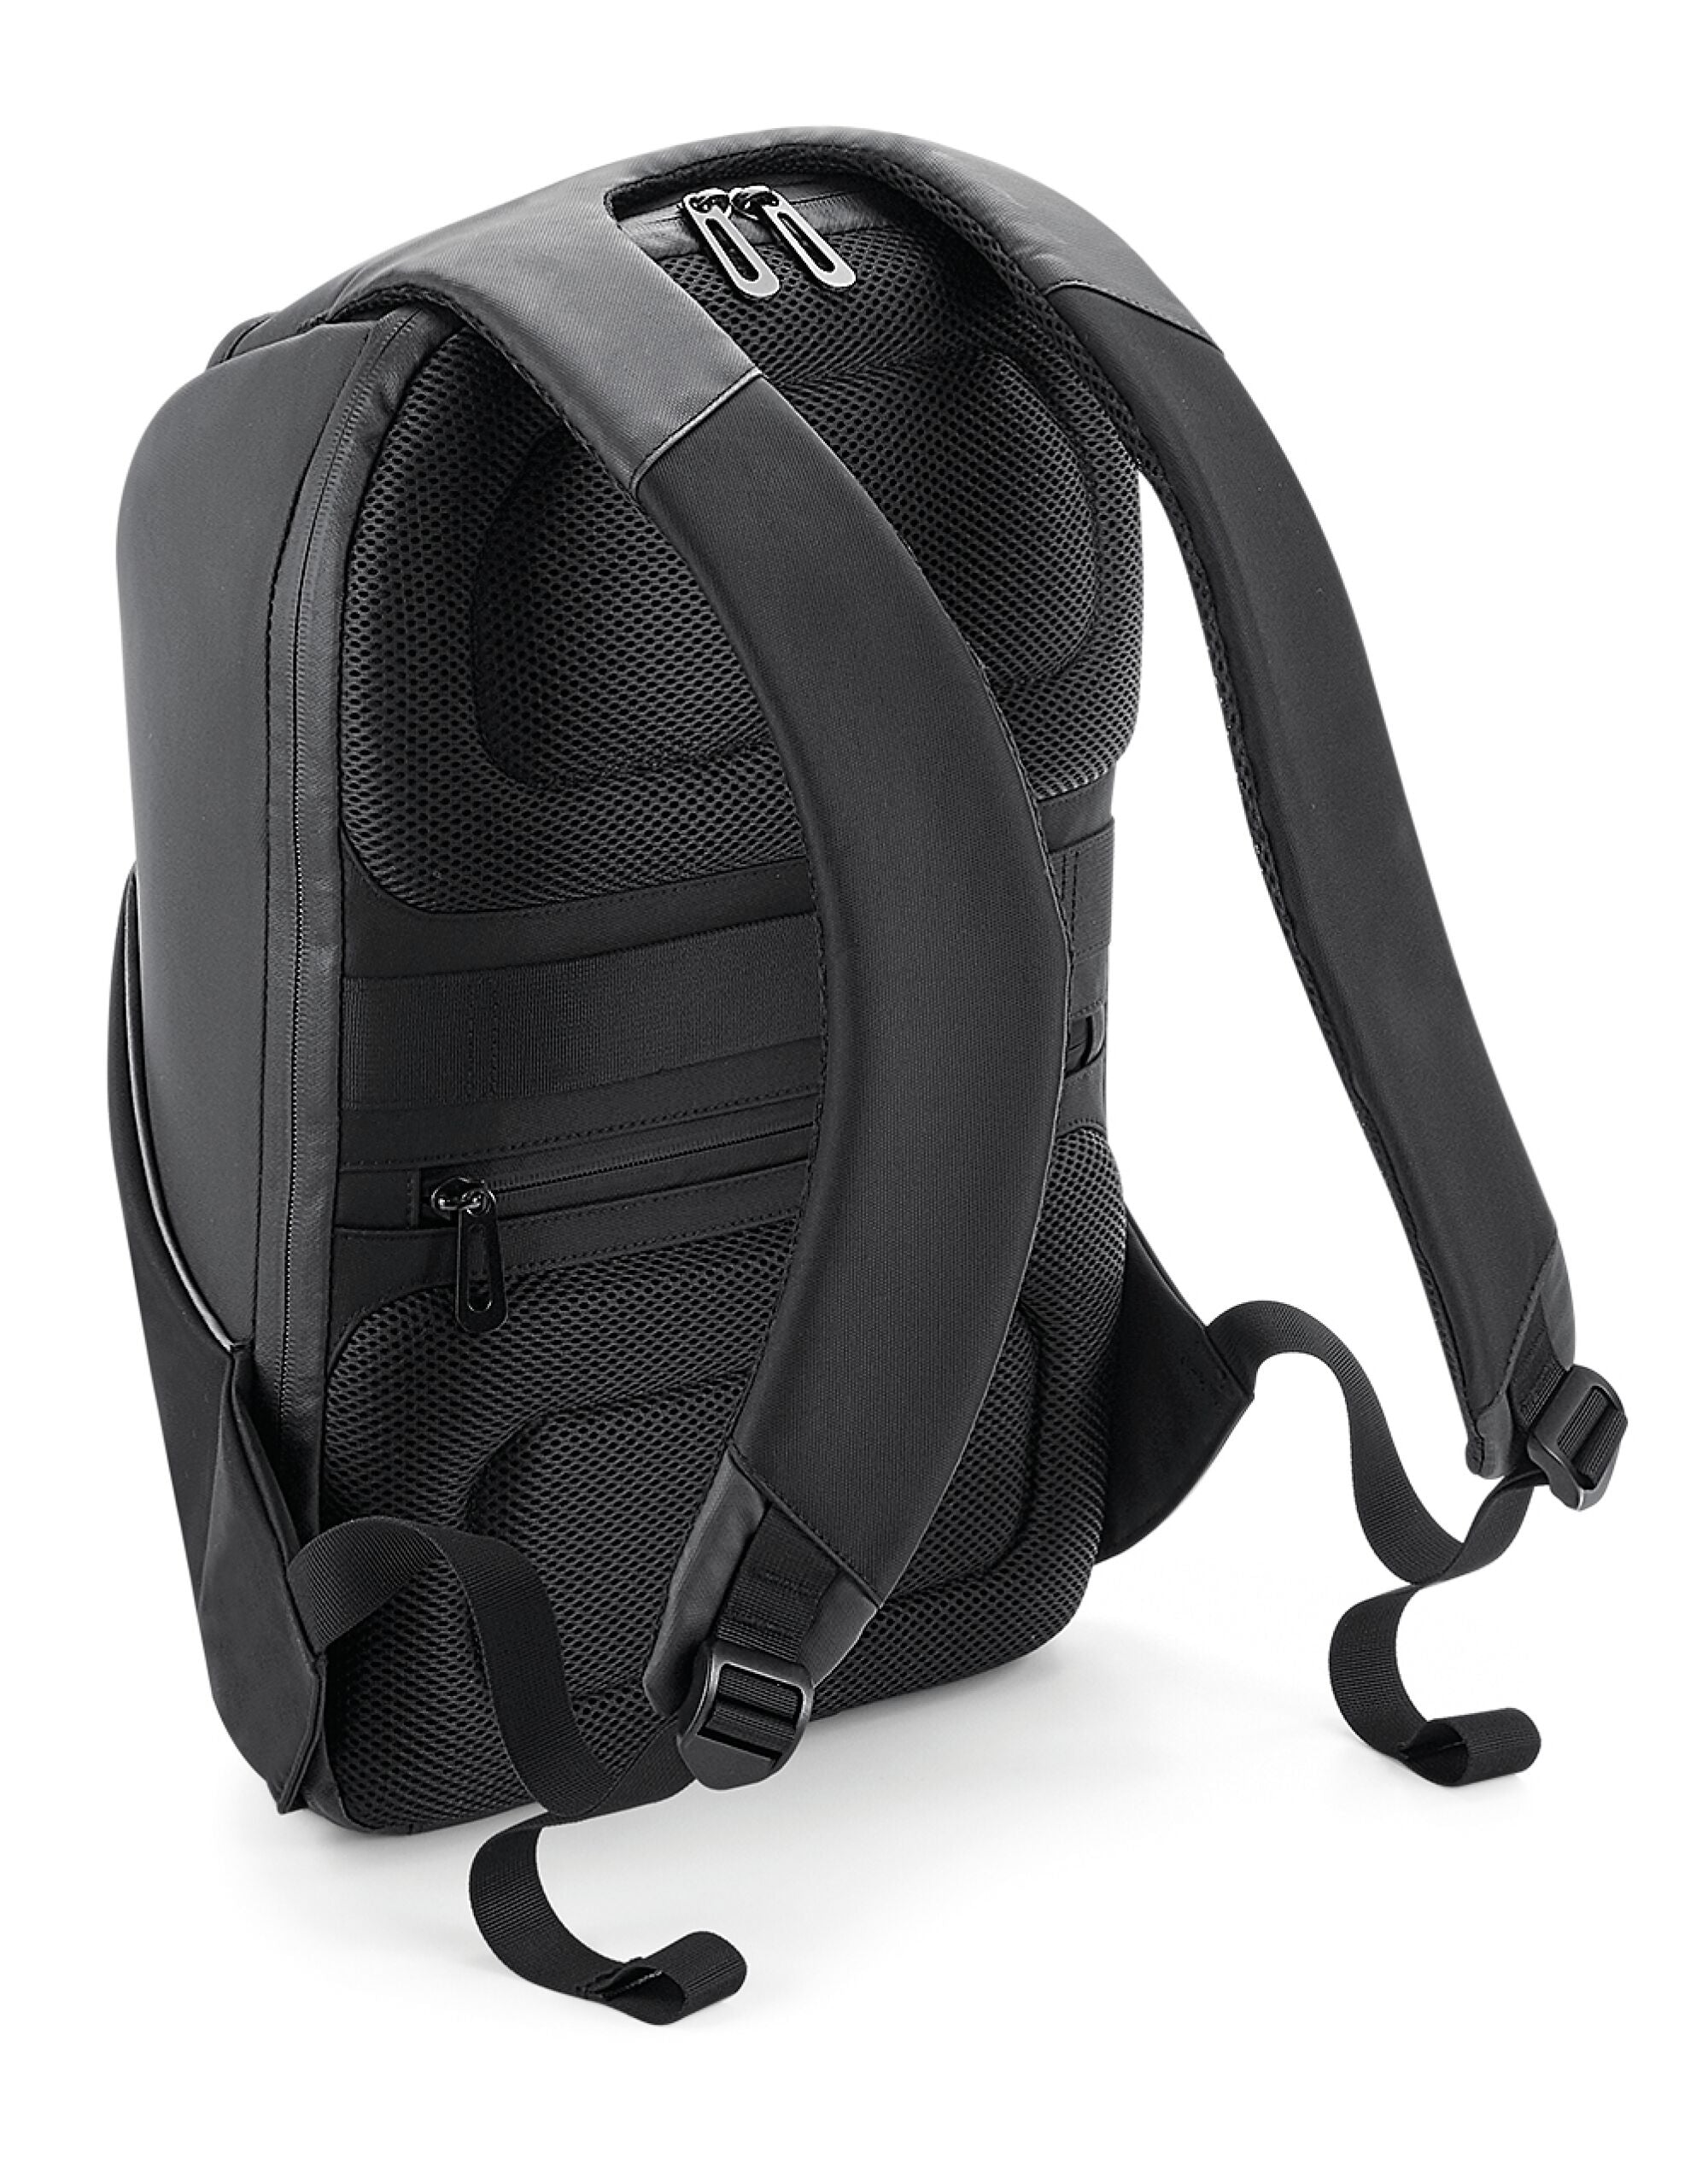 Quadra Project Charge Security Backpack TearAway label for ease of rebranding (QD925)